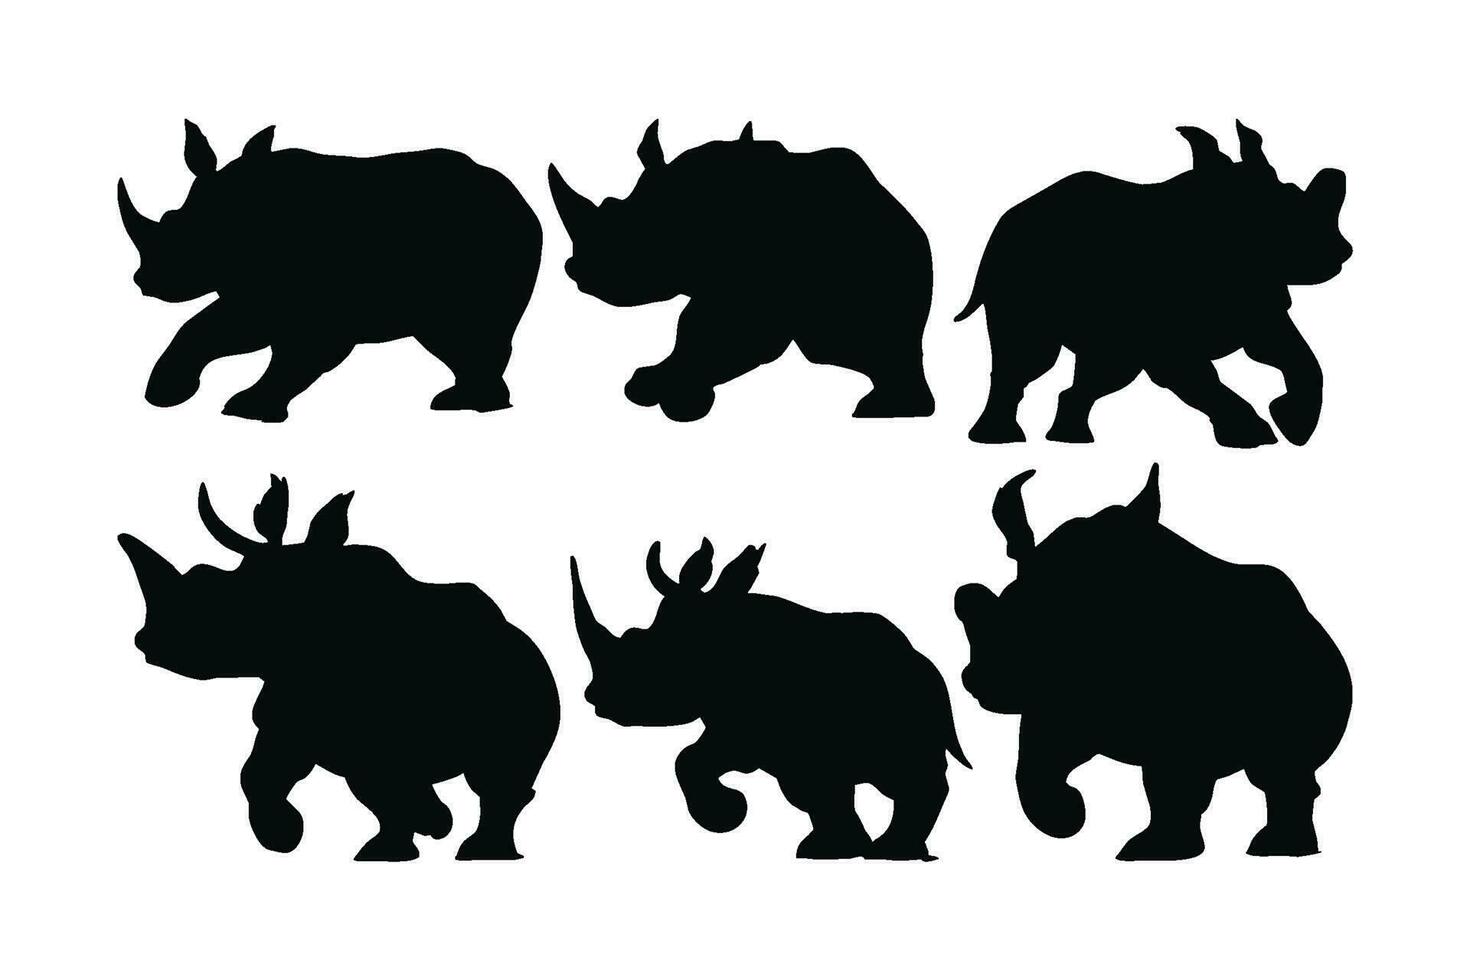 Wild peaceful rhino running in different positions. Herbivorous rhino running silhouette on a white background. Rhino full body silhouette collection. Dangerous rhinoceros silhouette bundle design. vector